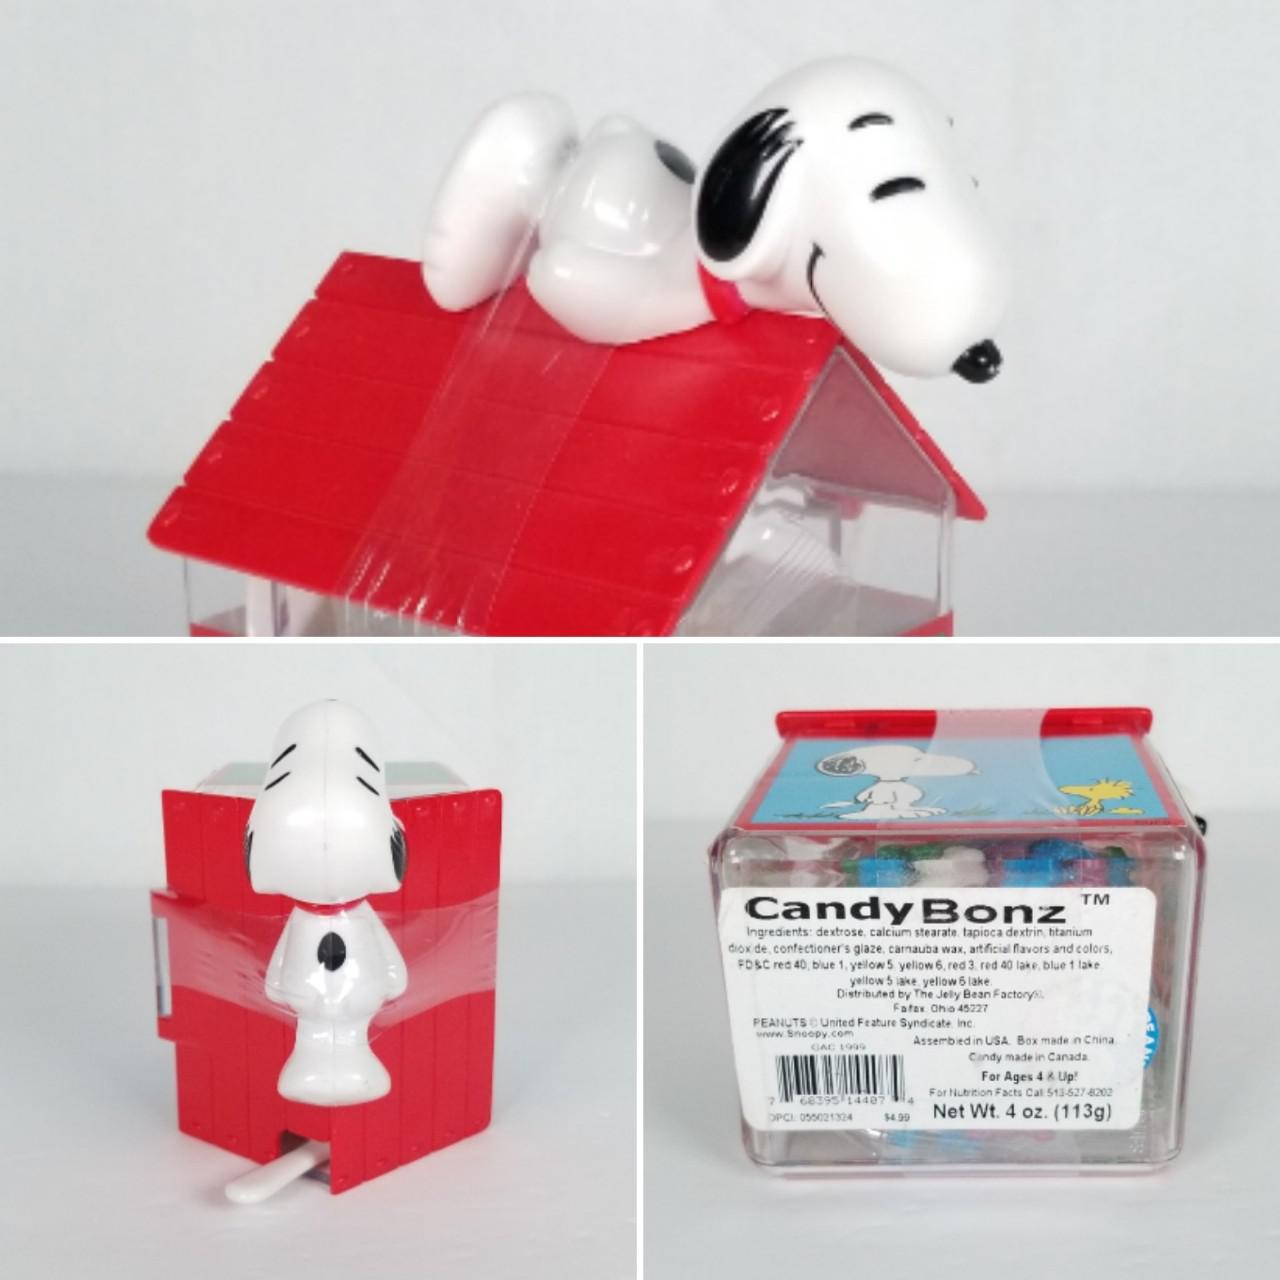 1999 Snoopy Dog House Filled With Candy Bonz, 50th - Depop